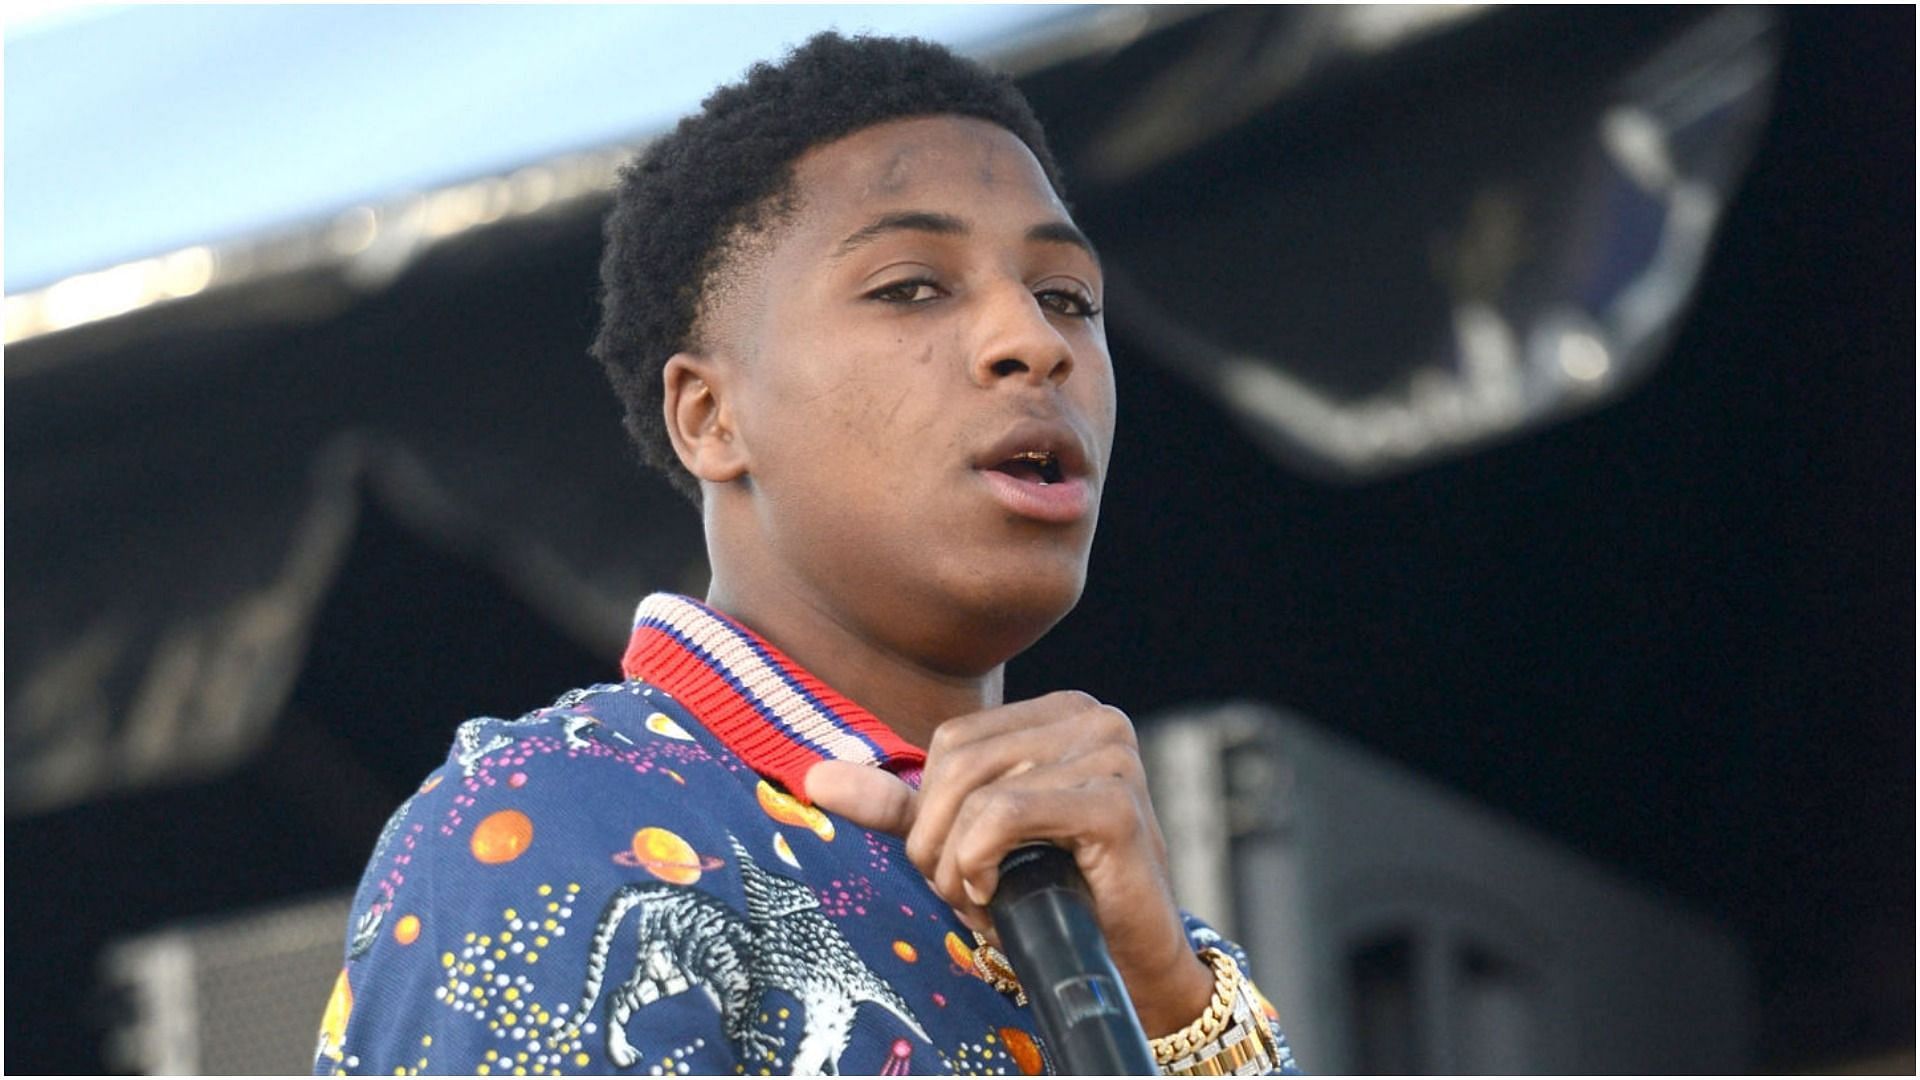 NBA YoungBoy made an allegation against Yaya Mayweather in his new song&#039;s lyrics (Image via Scott Dudelson/Getty Images)